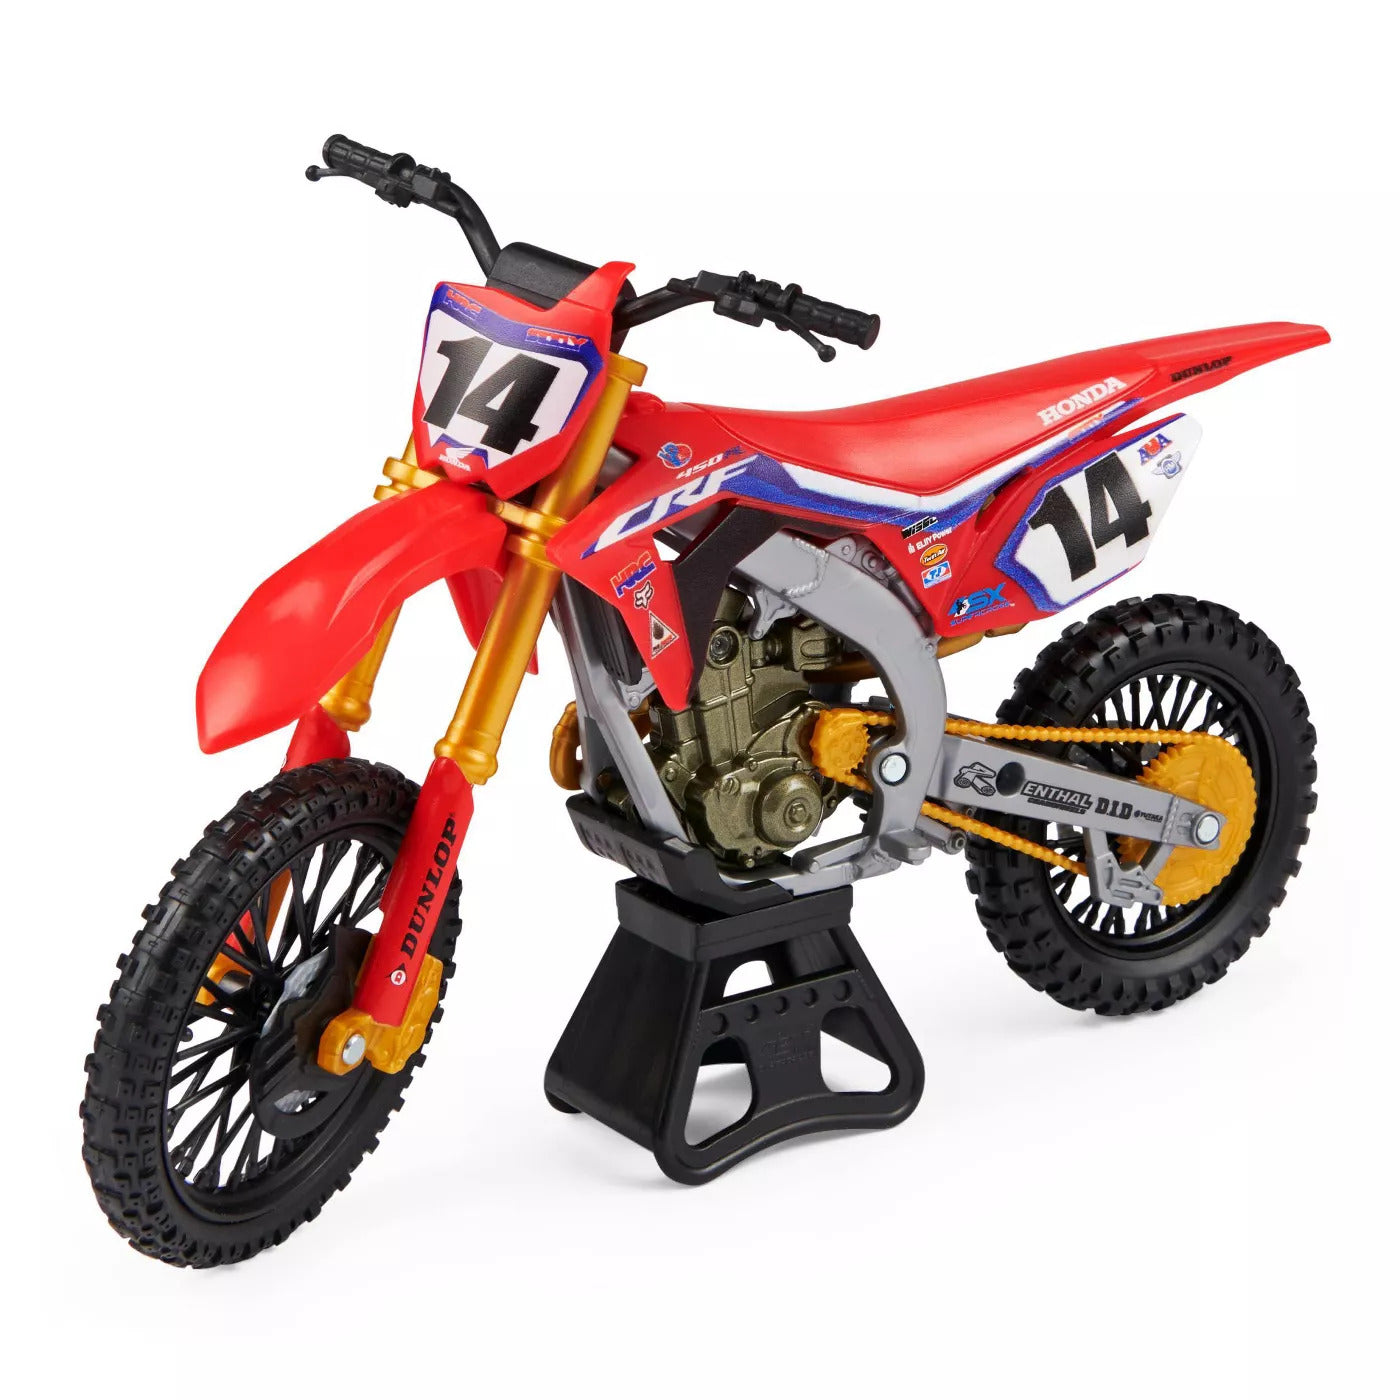 SX Supercross Motorcycle 1:10 - Cole Seely